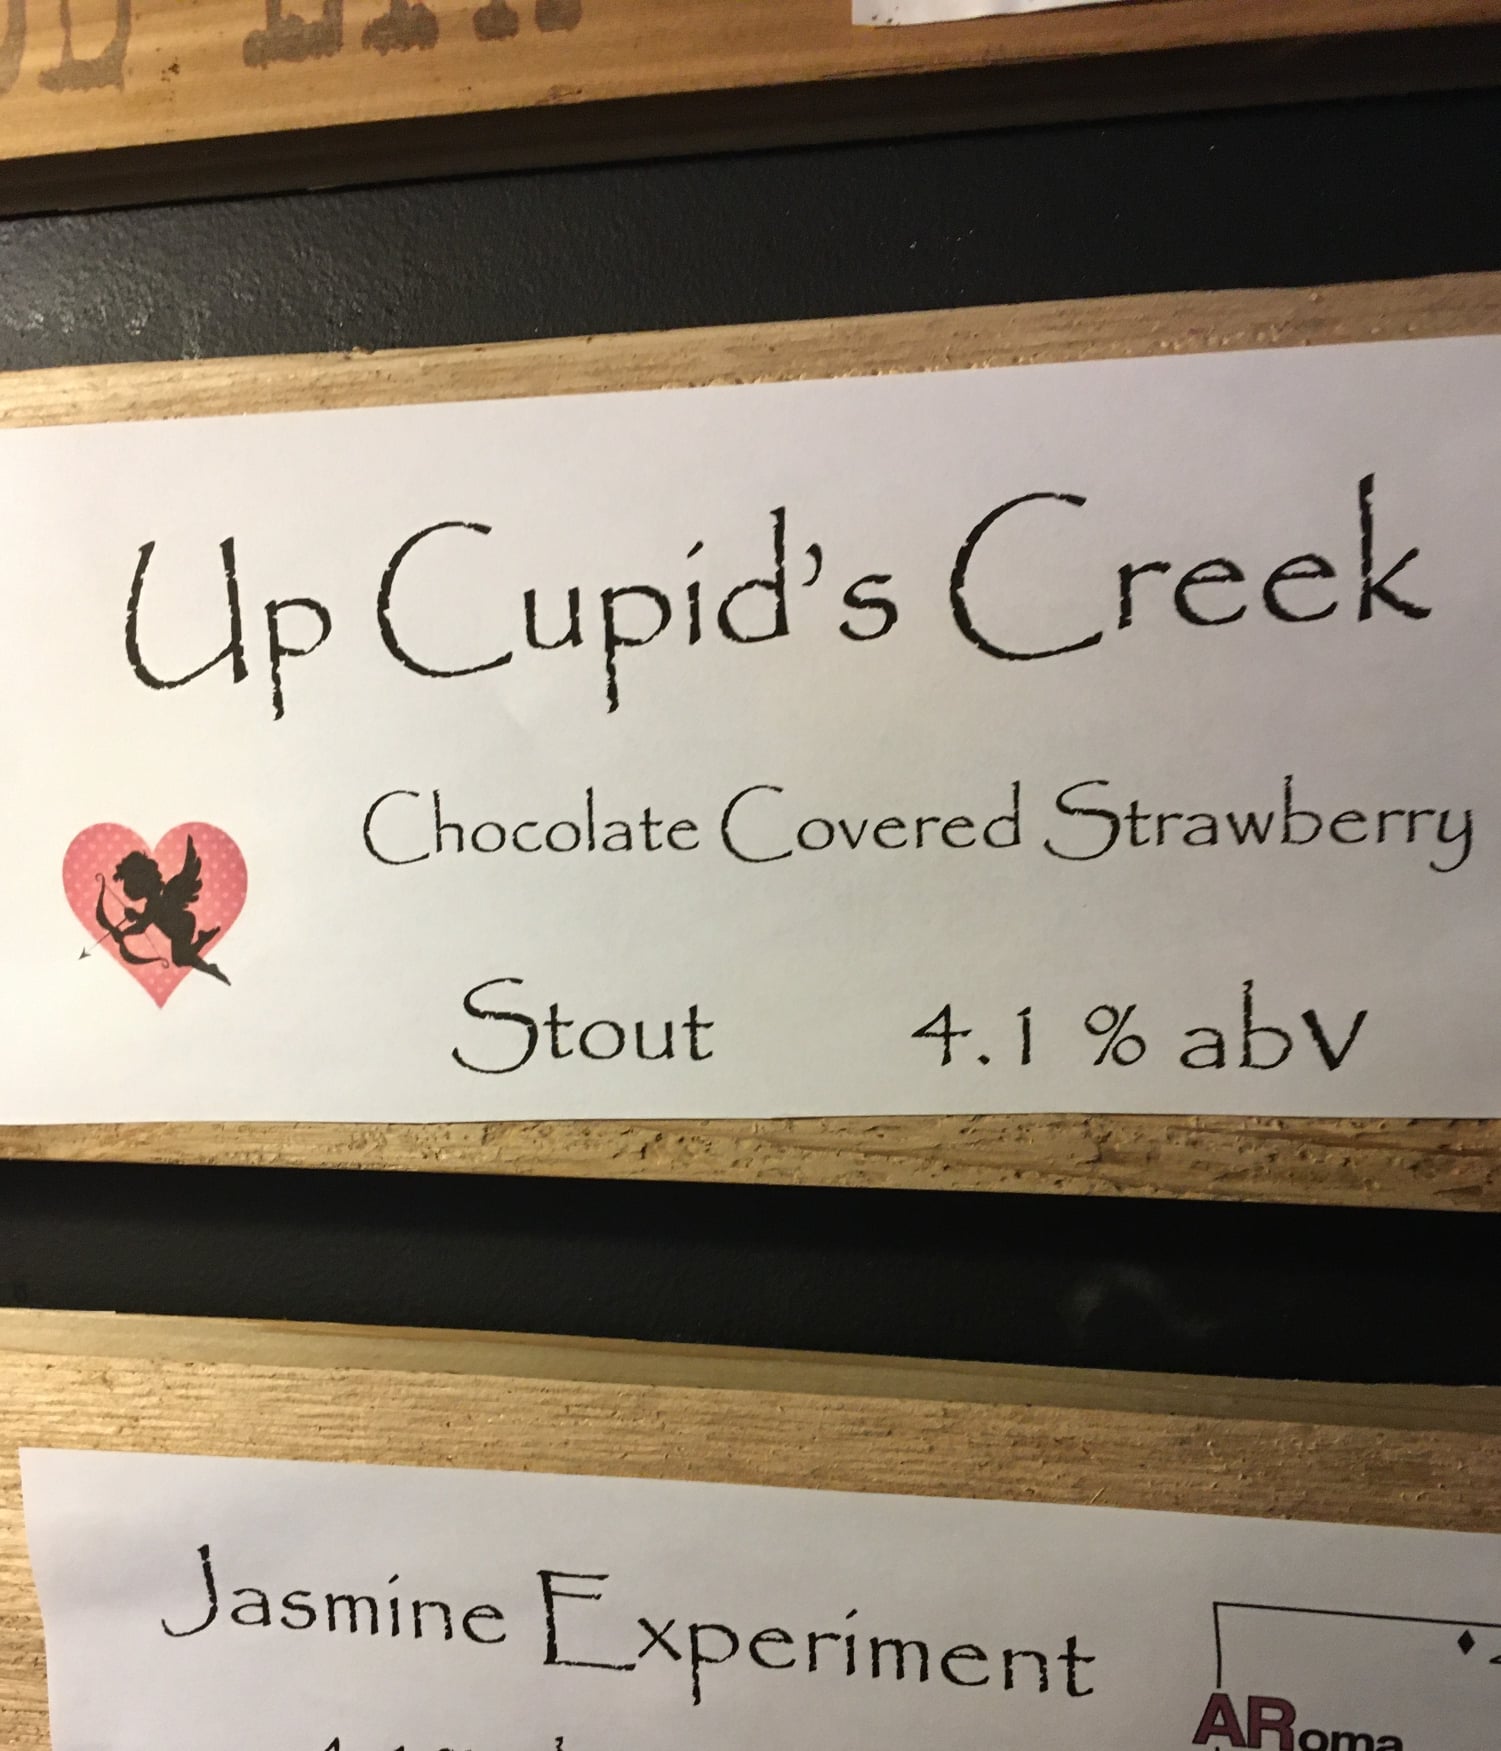 Sign for Up Cupid's Creek  from Hickory Creek brewing